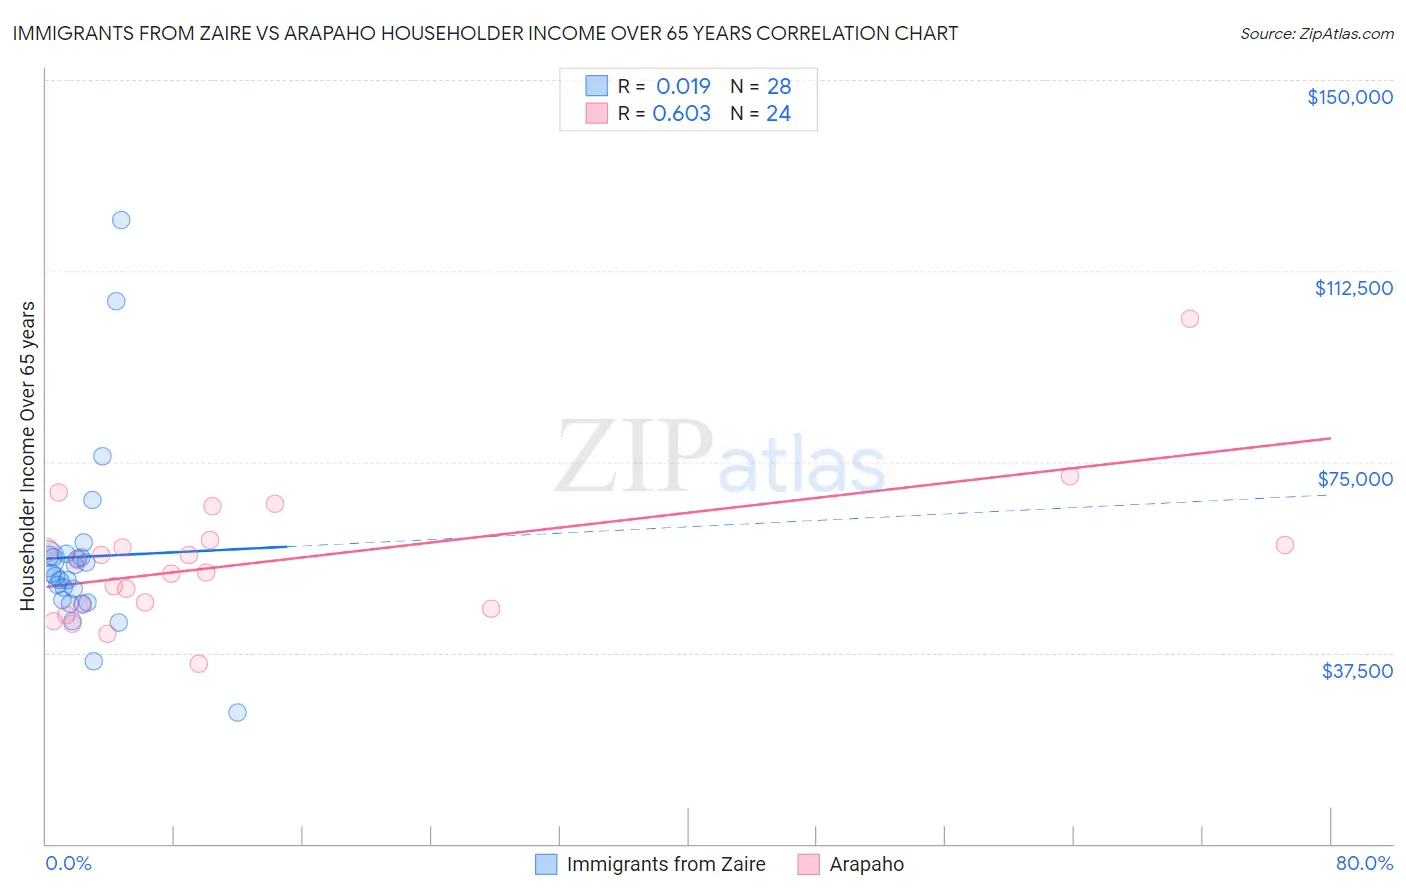 Immigrants from Zaire vs Arapaho Householder Income Over 65 years